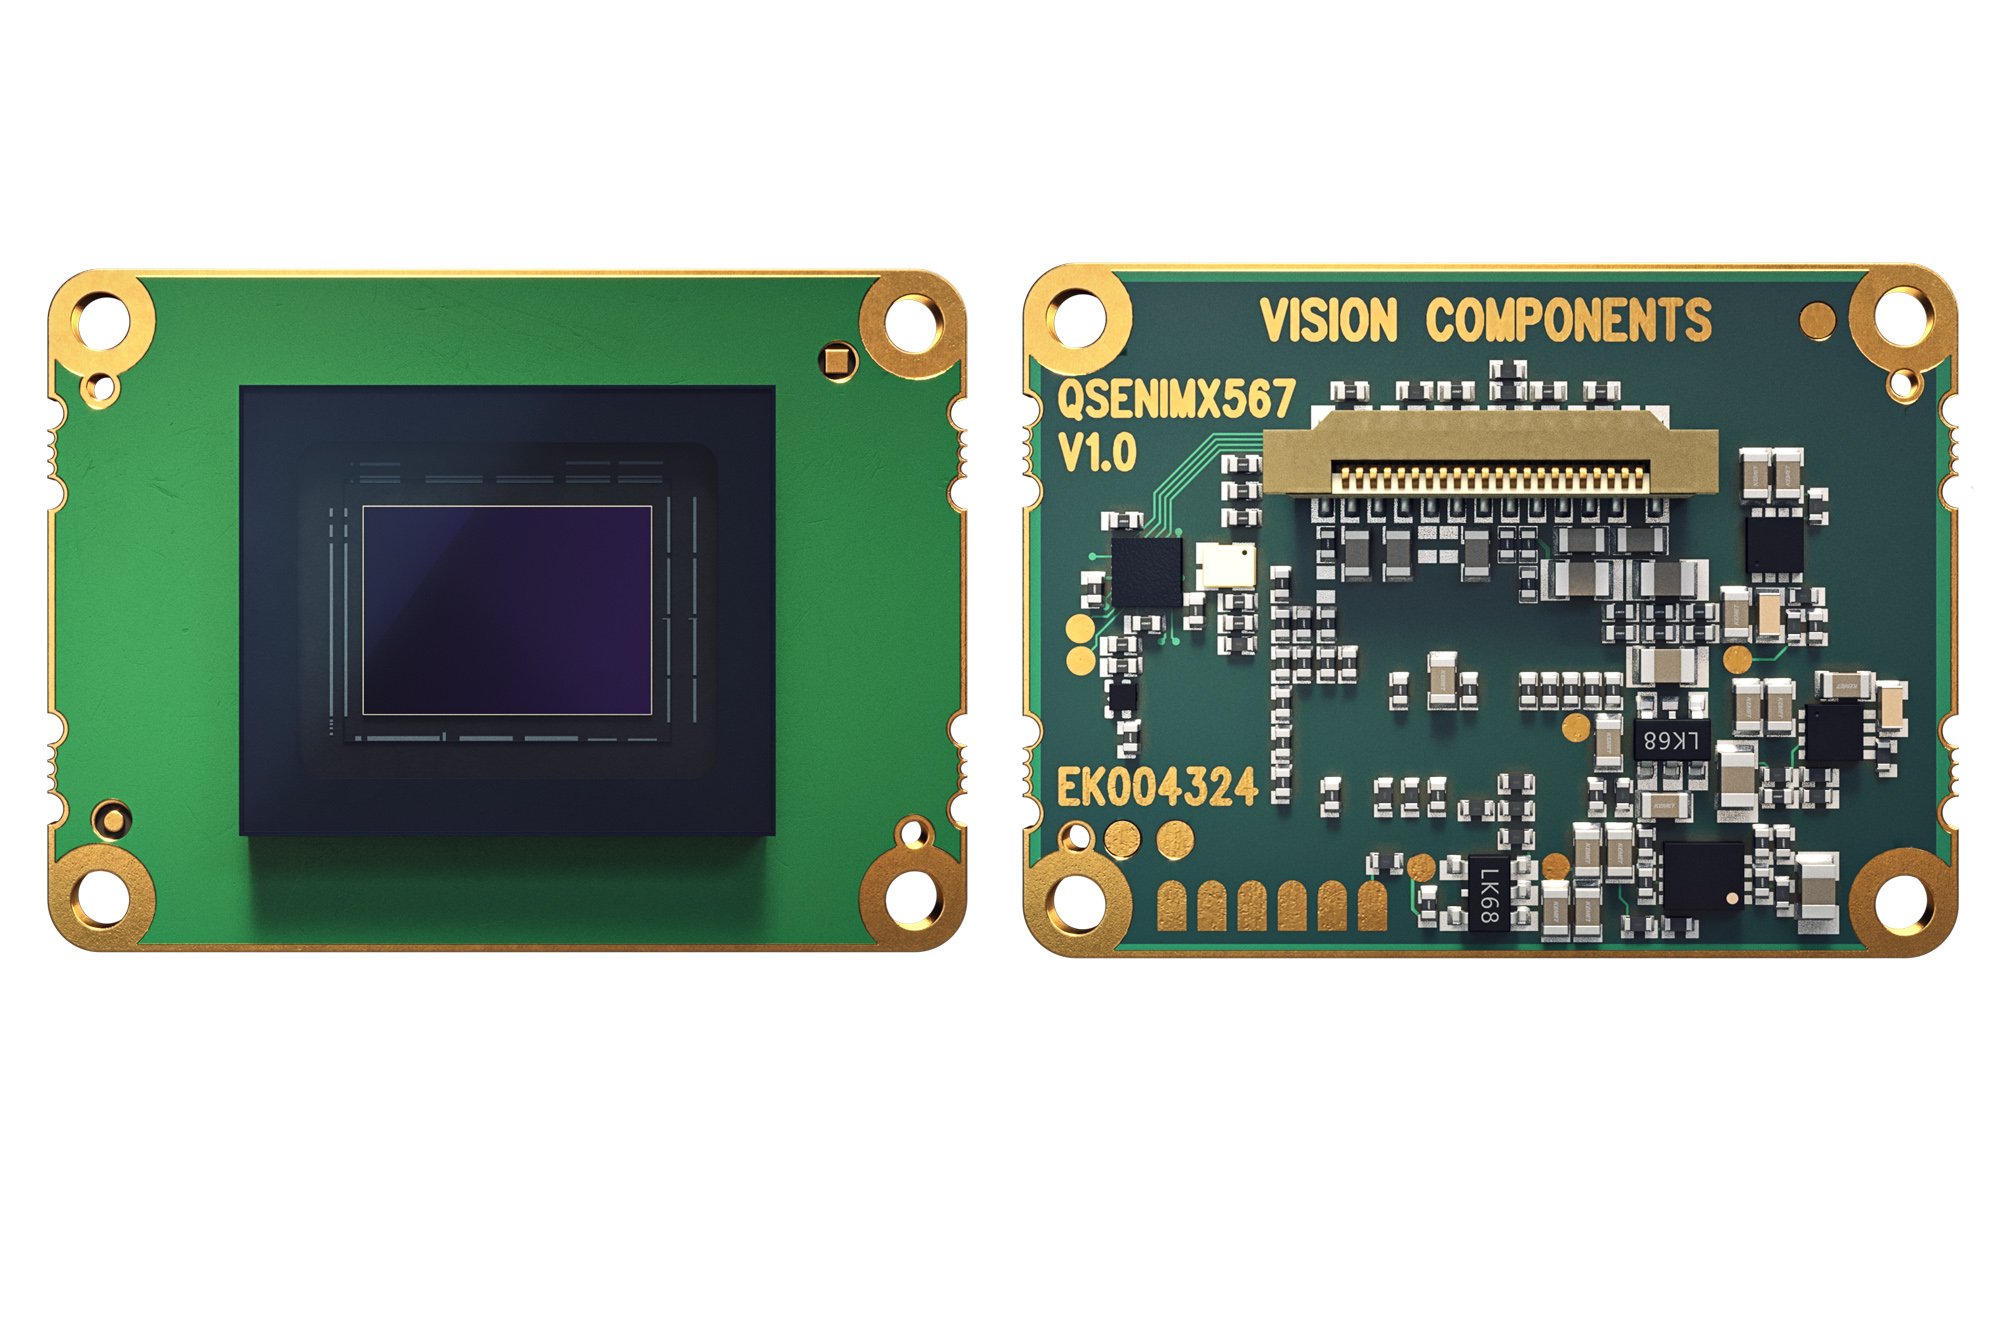 Vision Components at LASER World of PHOTONICS:  MIPI Cameras and Smart Embedded Vision Systems